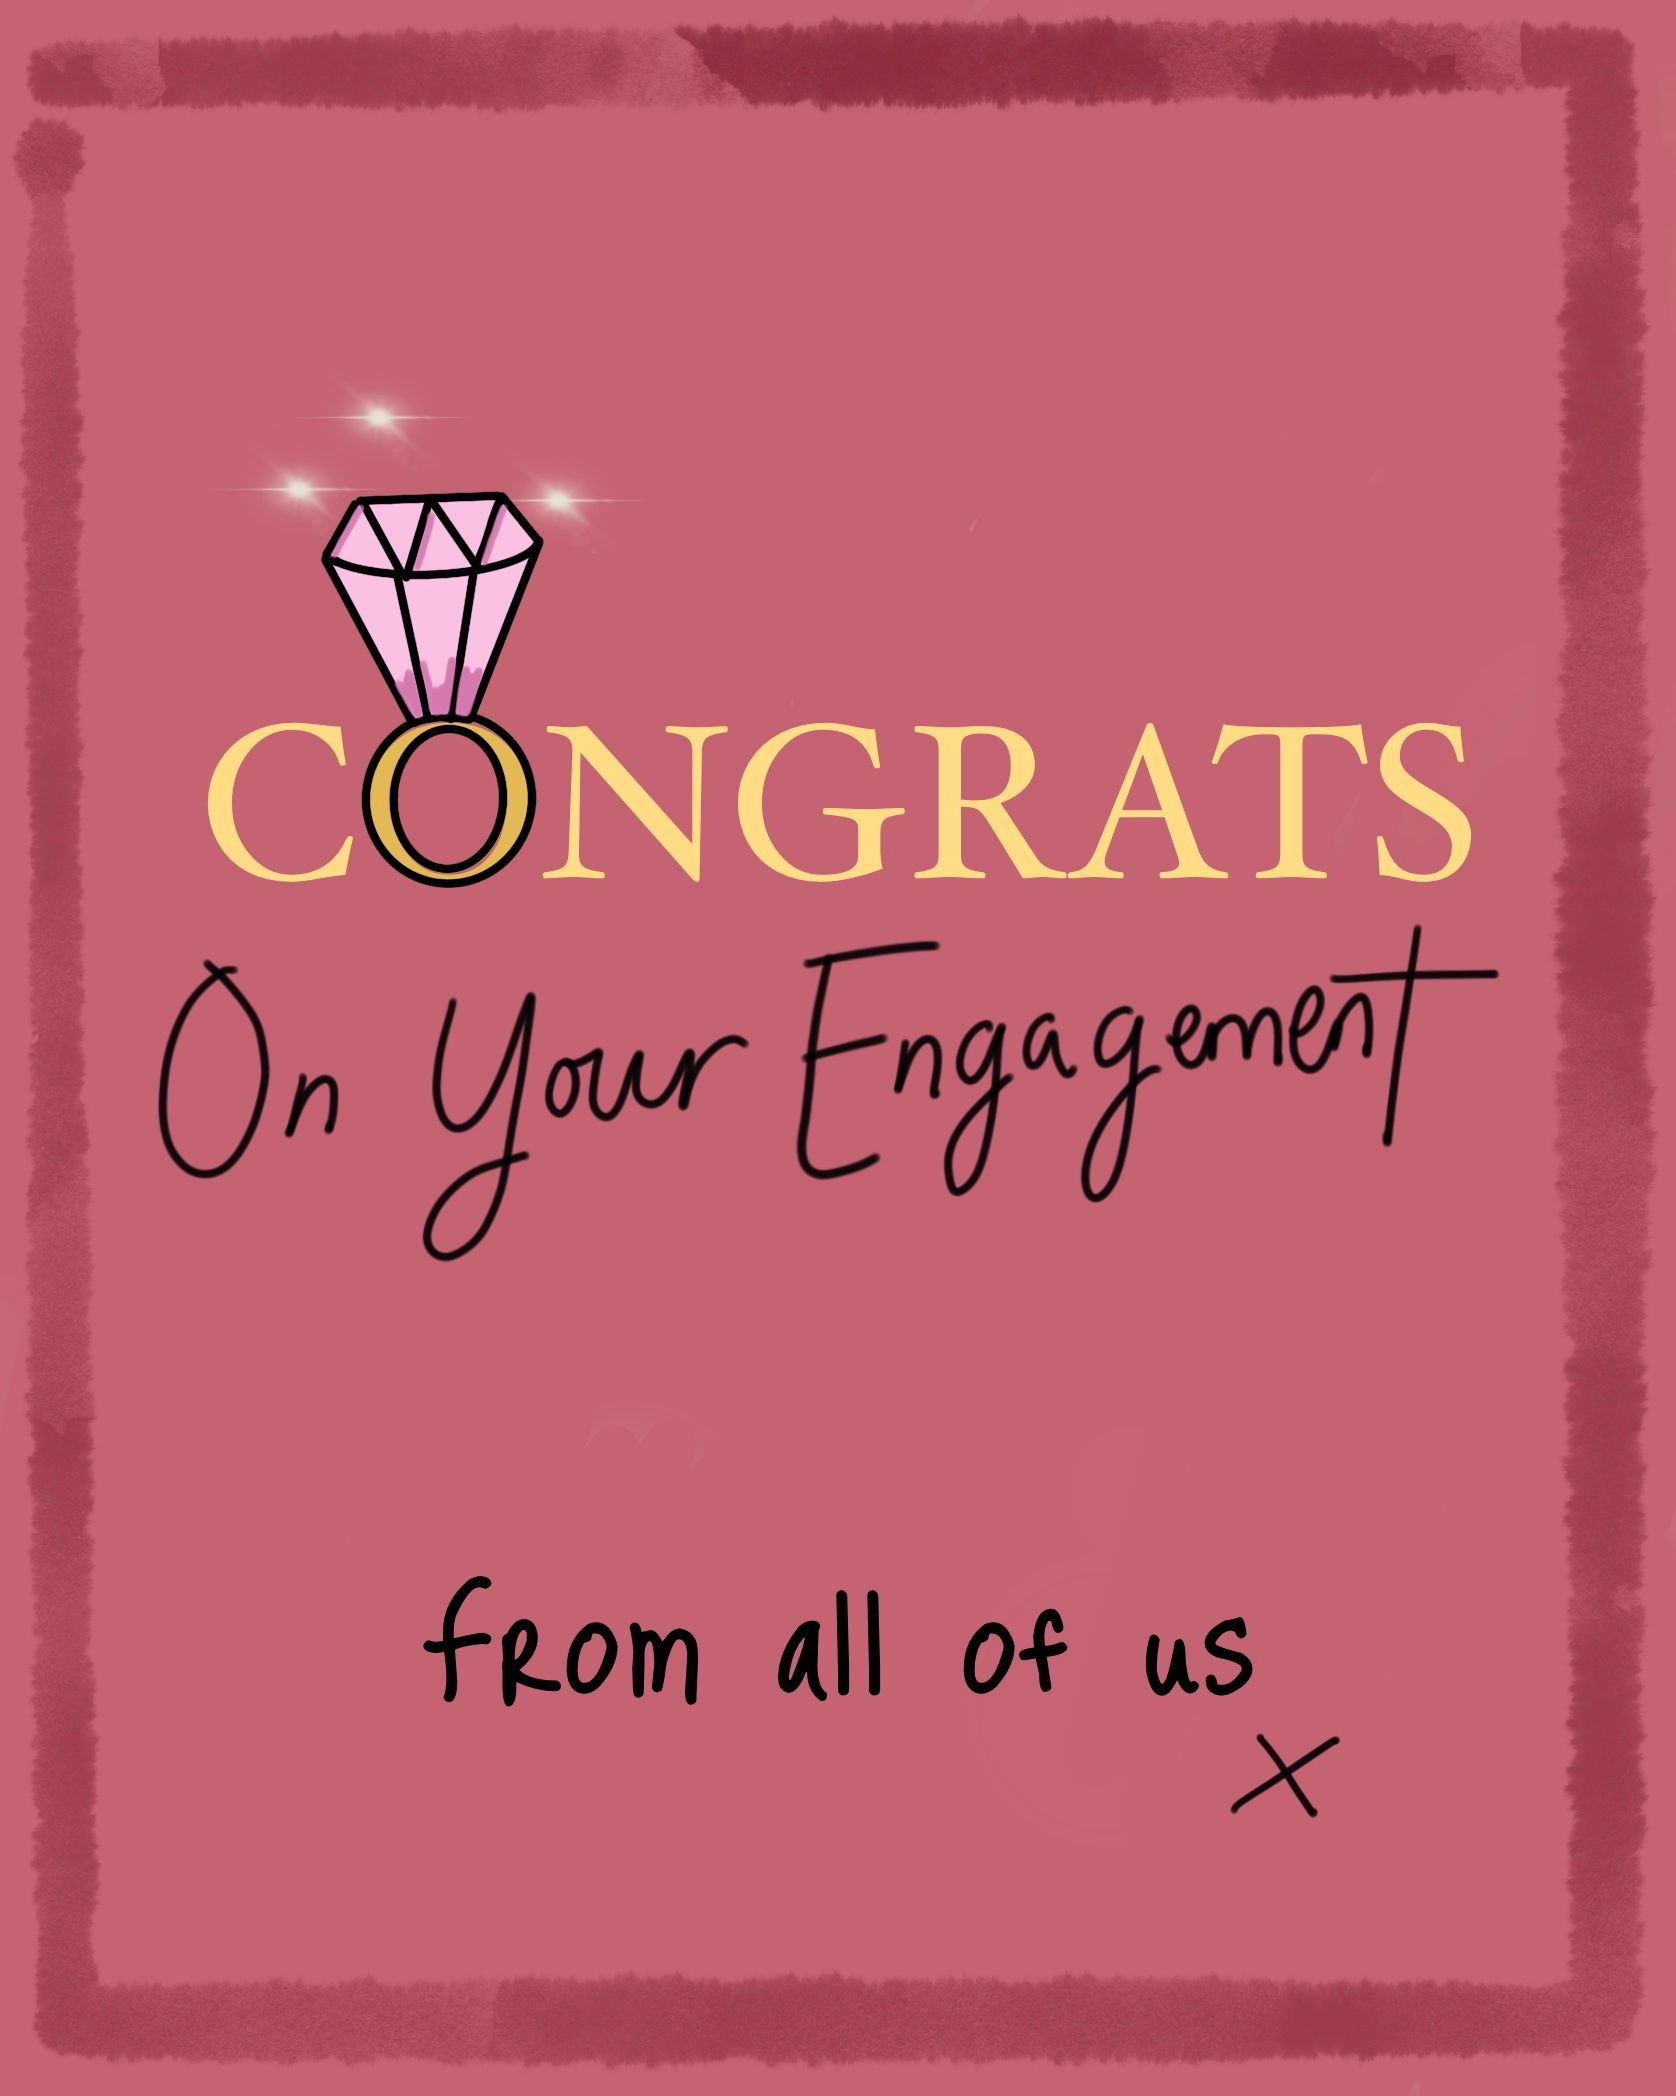 Card design "congrats on your engagement"